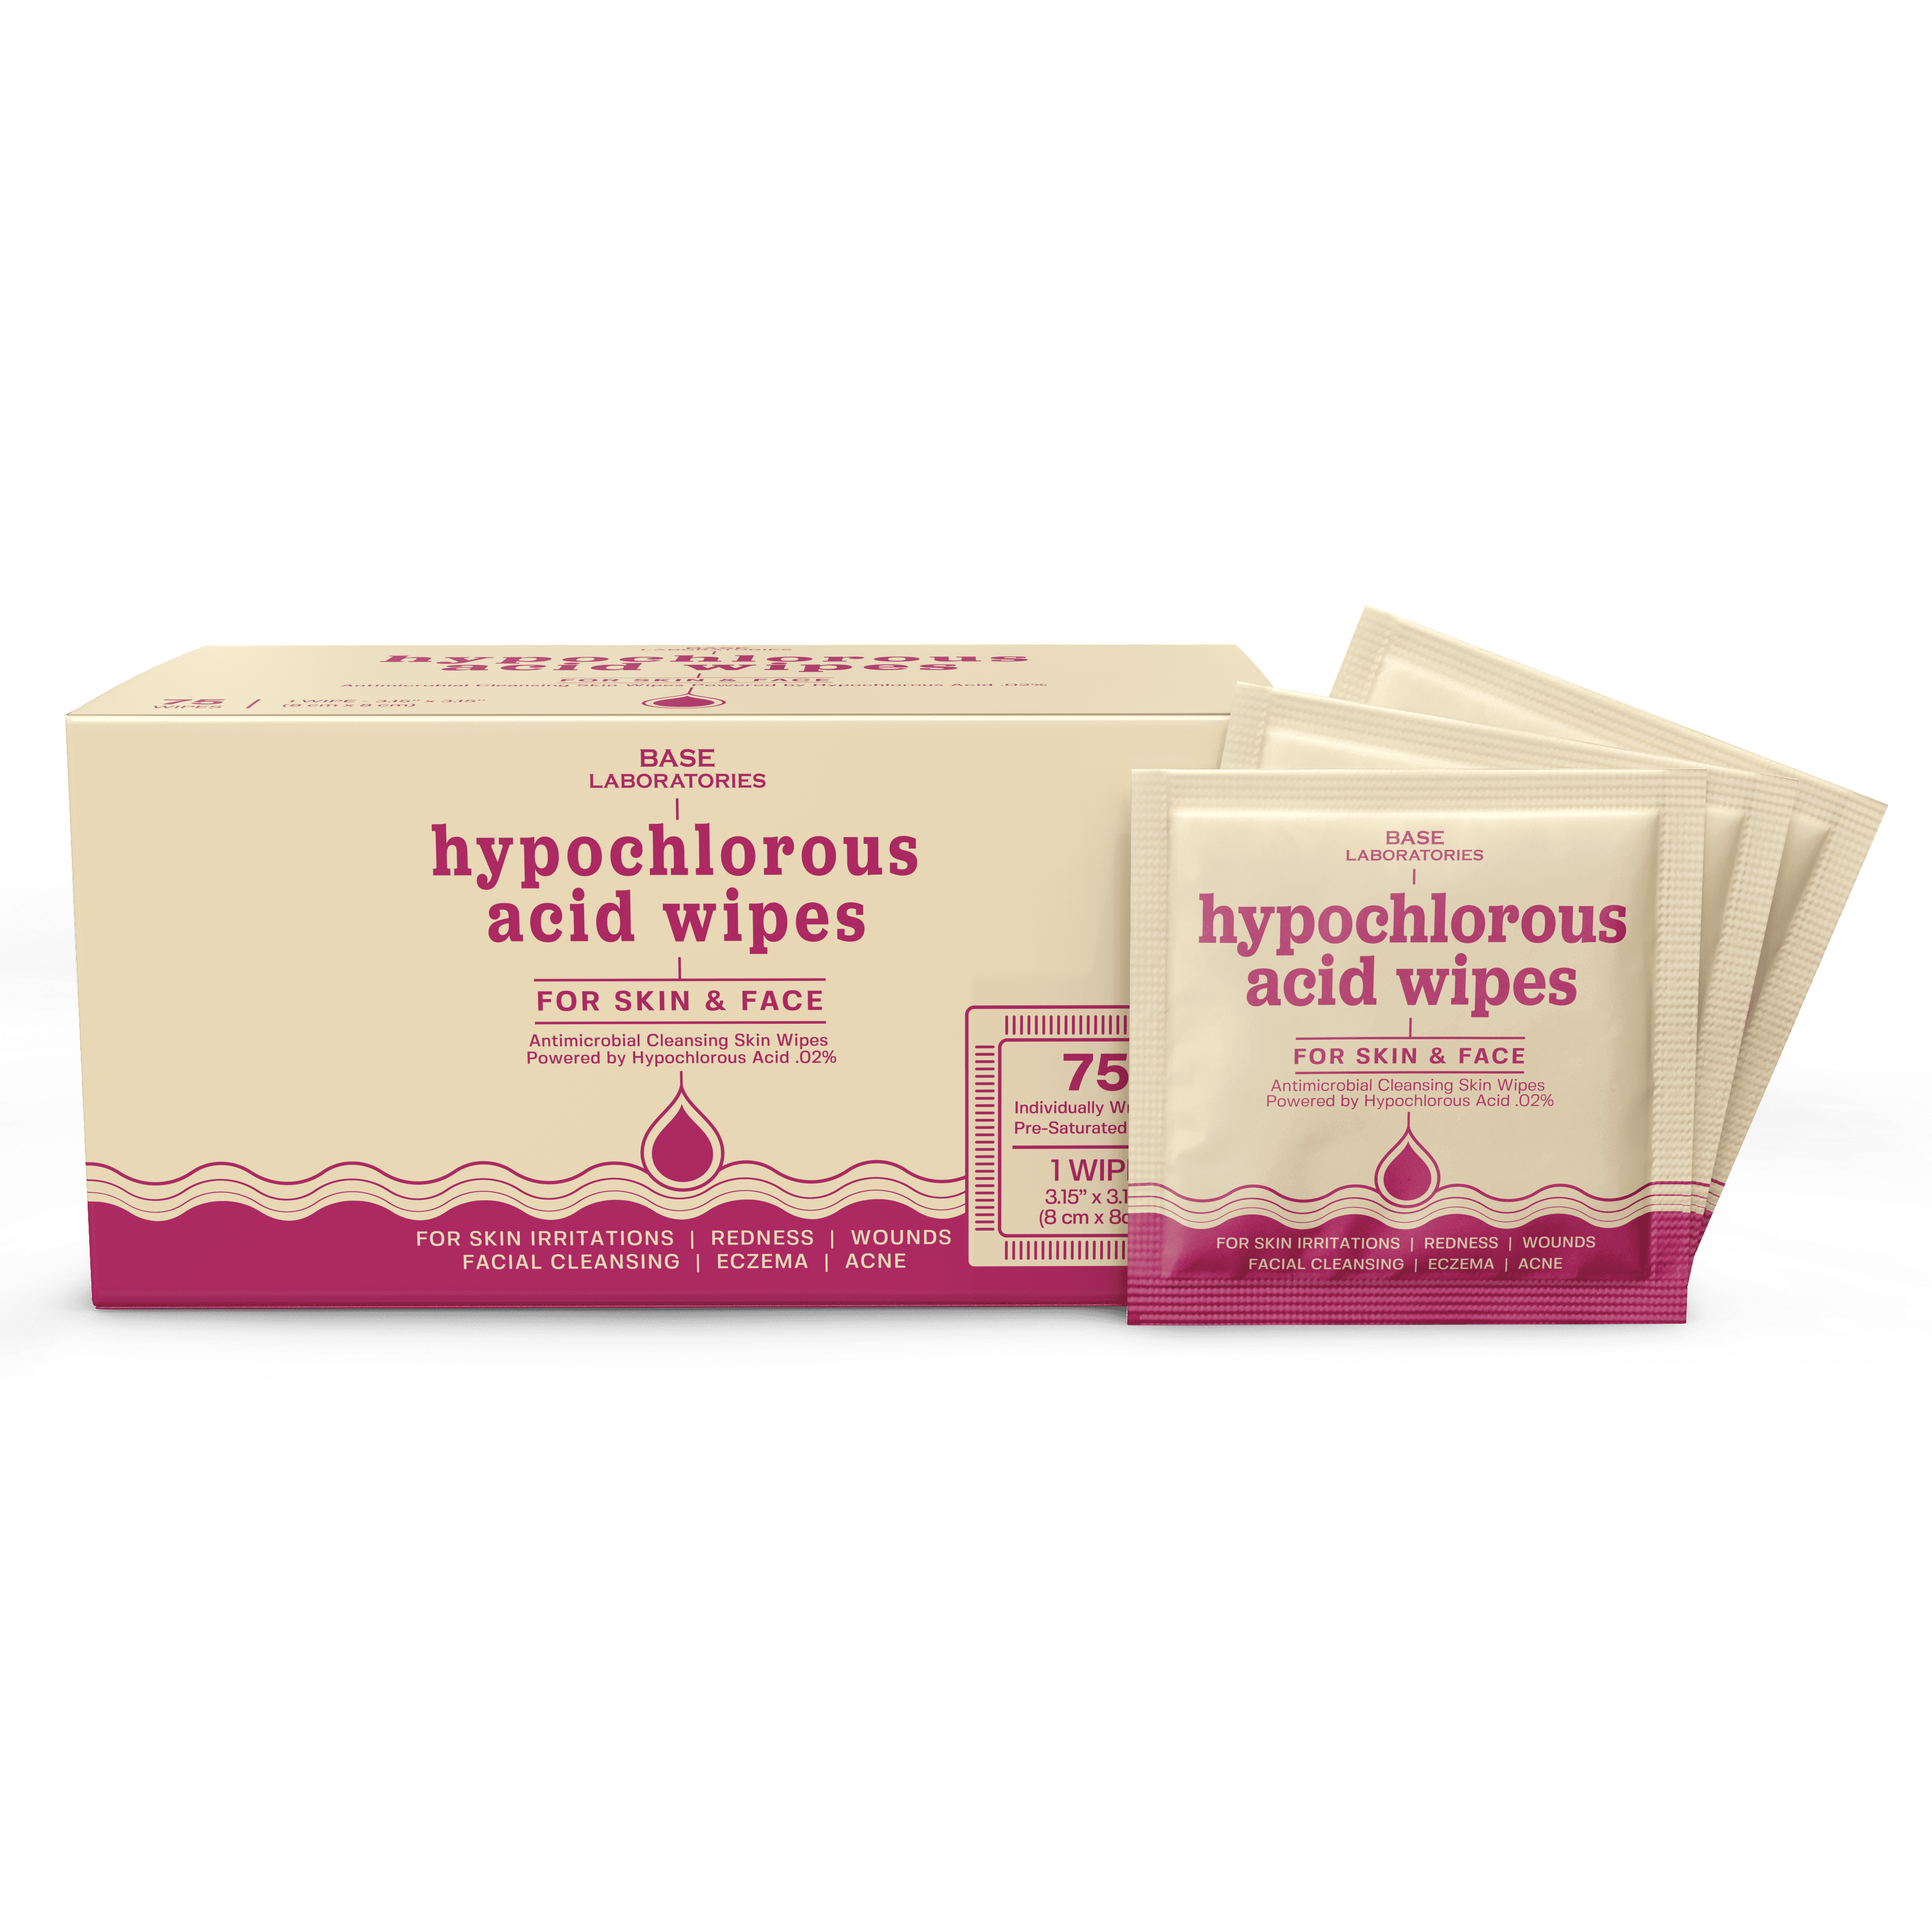 Hypochlorous Acid Wipes for Skin & Face - 75 Ct Base Laboratories 